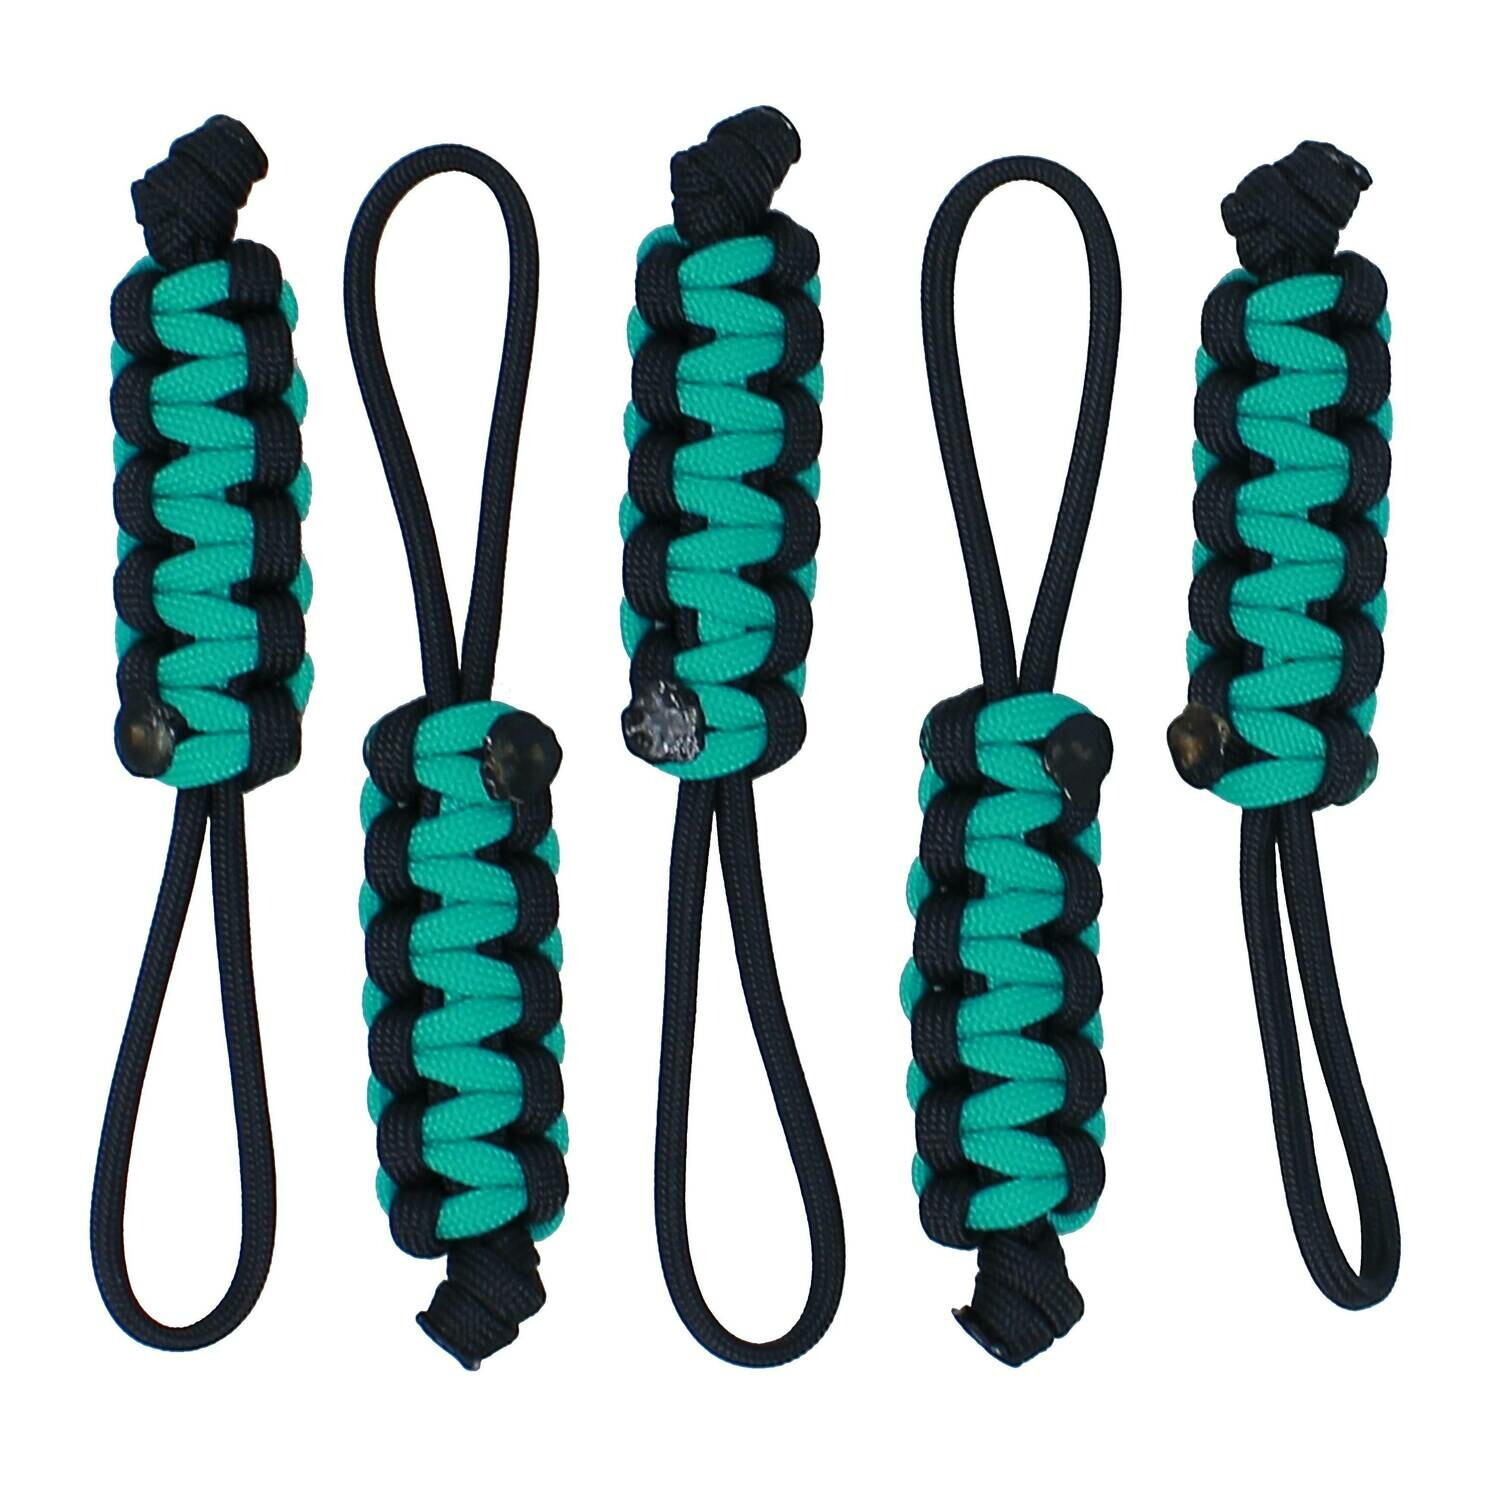 Black & Turquoise Paracord Zipper Pulls - Pick Your Options